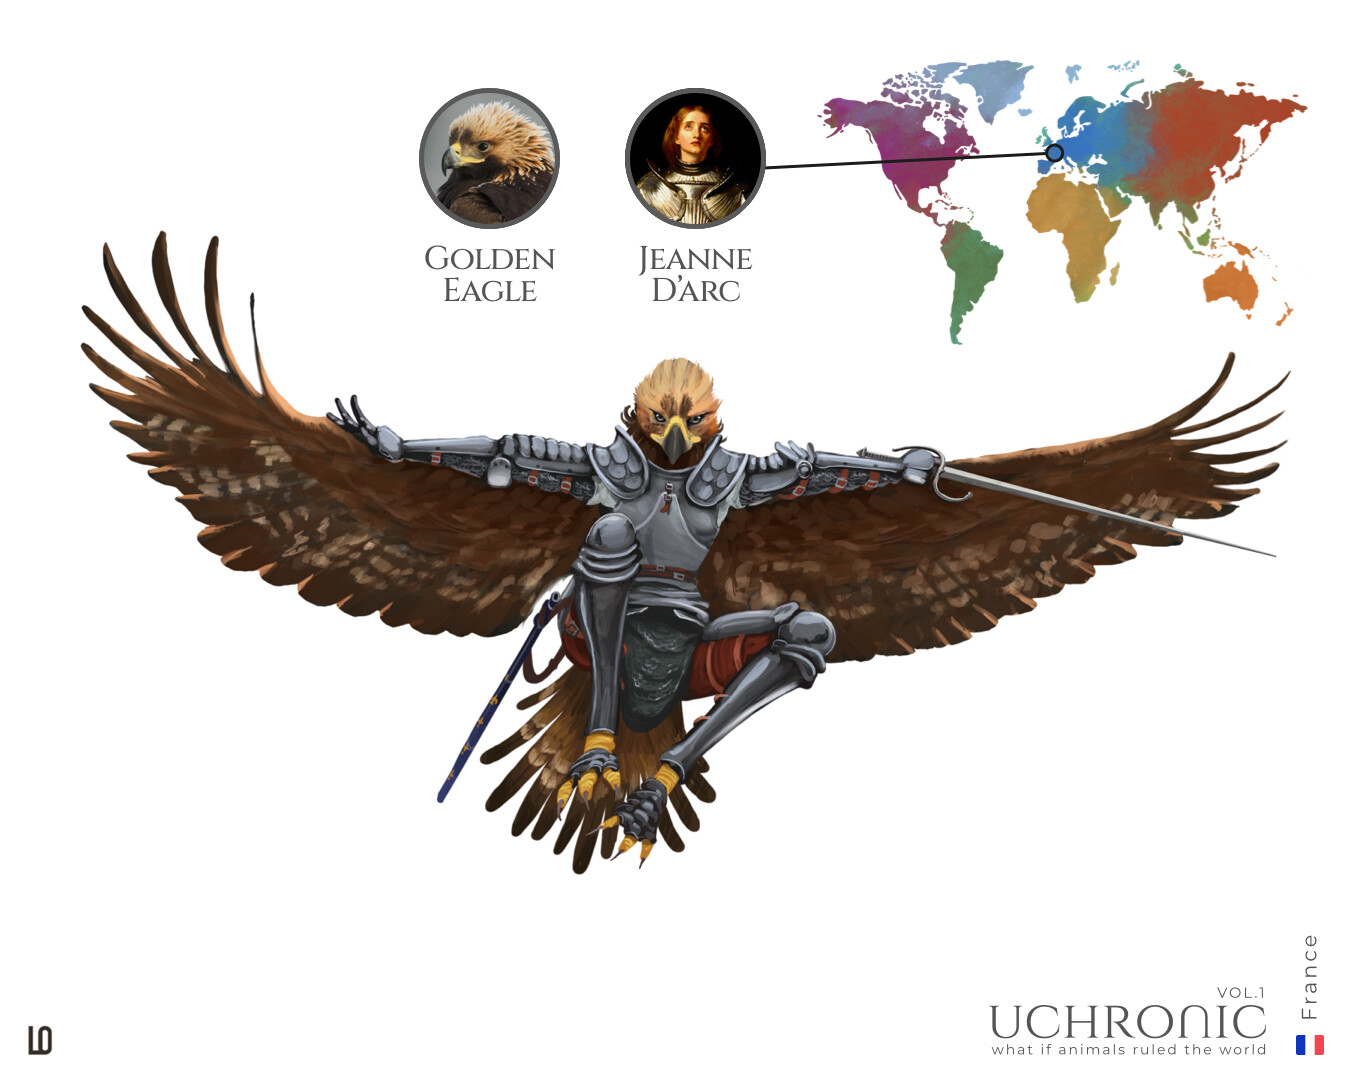 Le Grand Jeanne D’Arc, a fearful warrior that fought in France, as an elegant Golden Eagle.